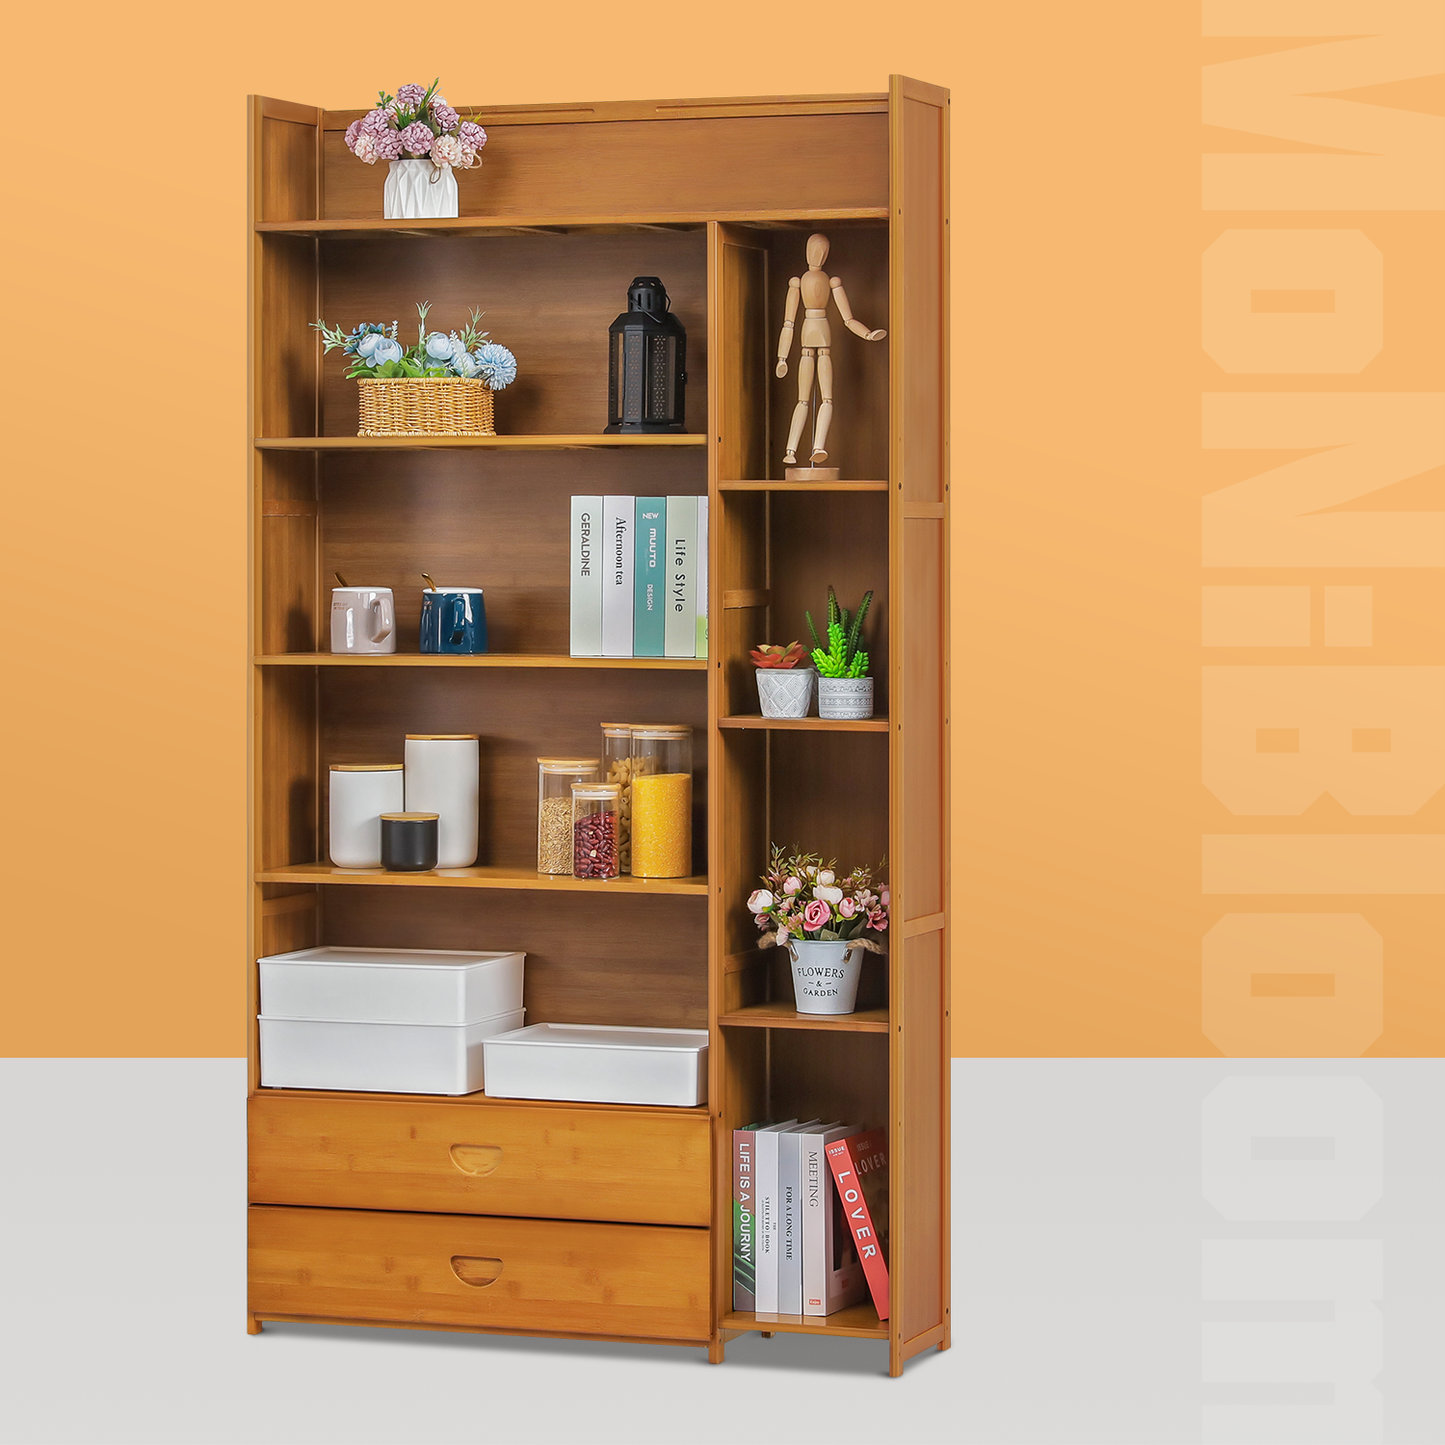 Multi-Functional Storage Organizer Shelf - Open Top - with Compartment Panel & Drawer - 6 Tier - Brown